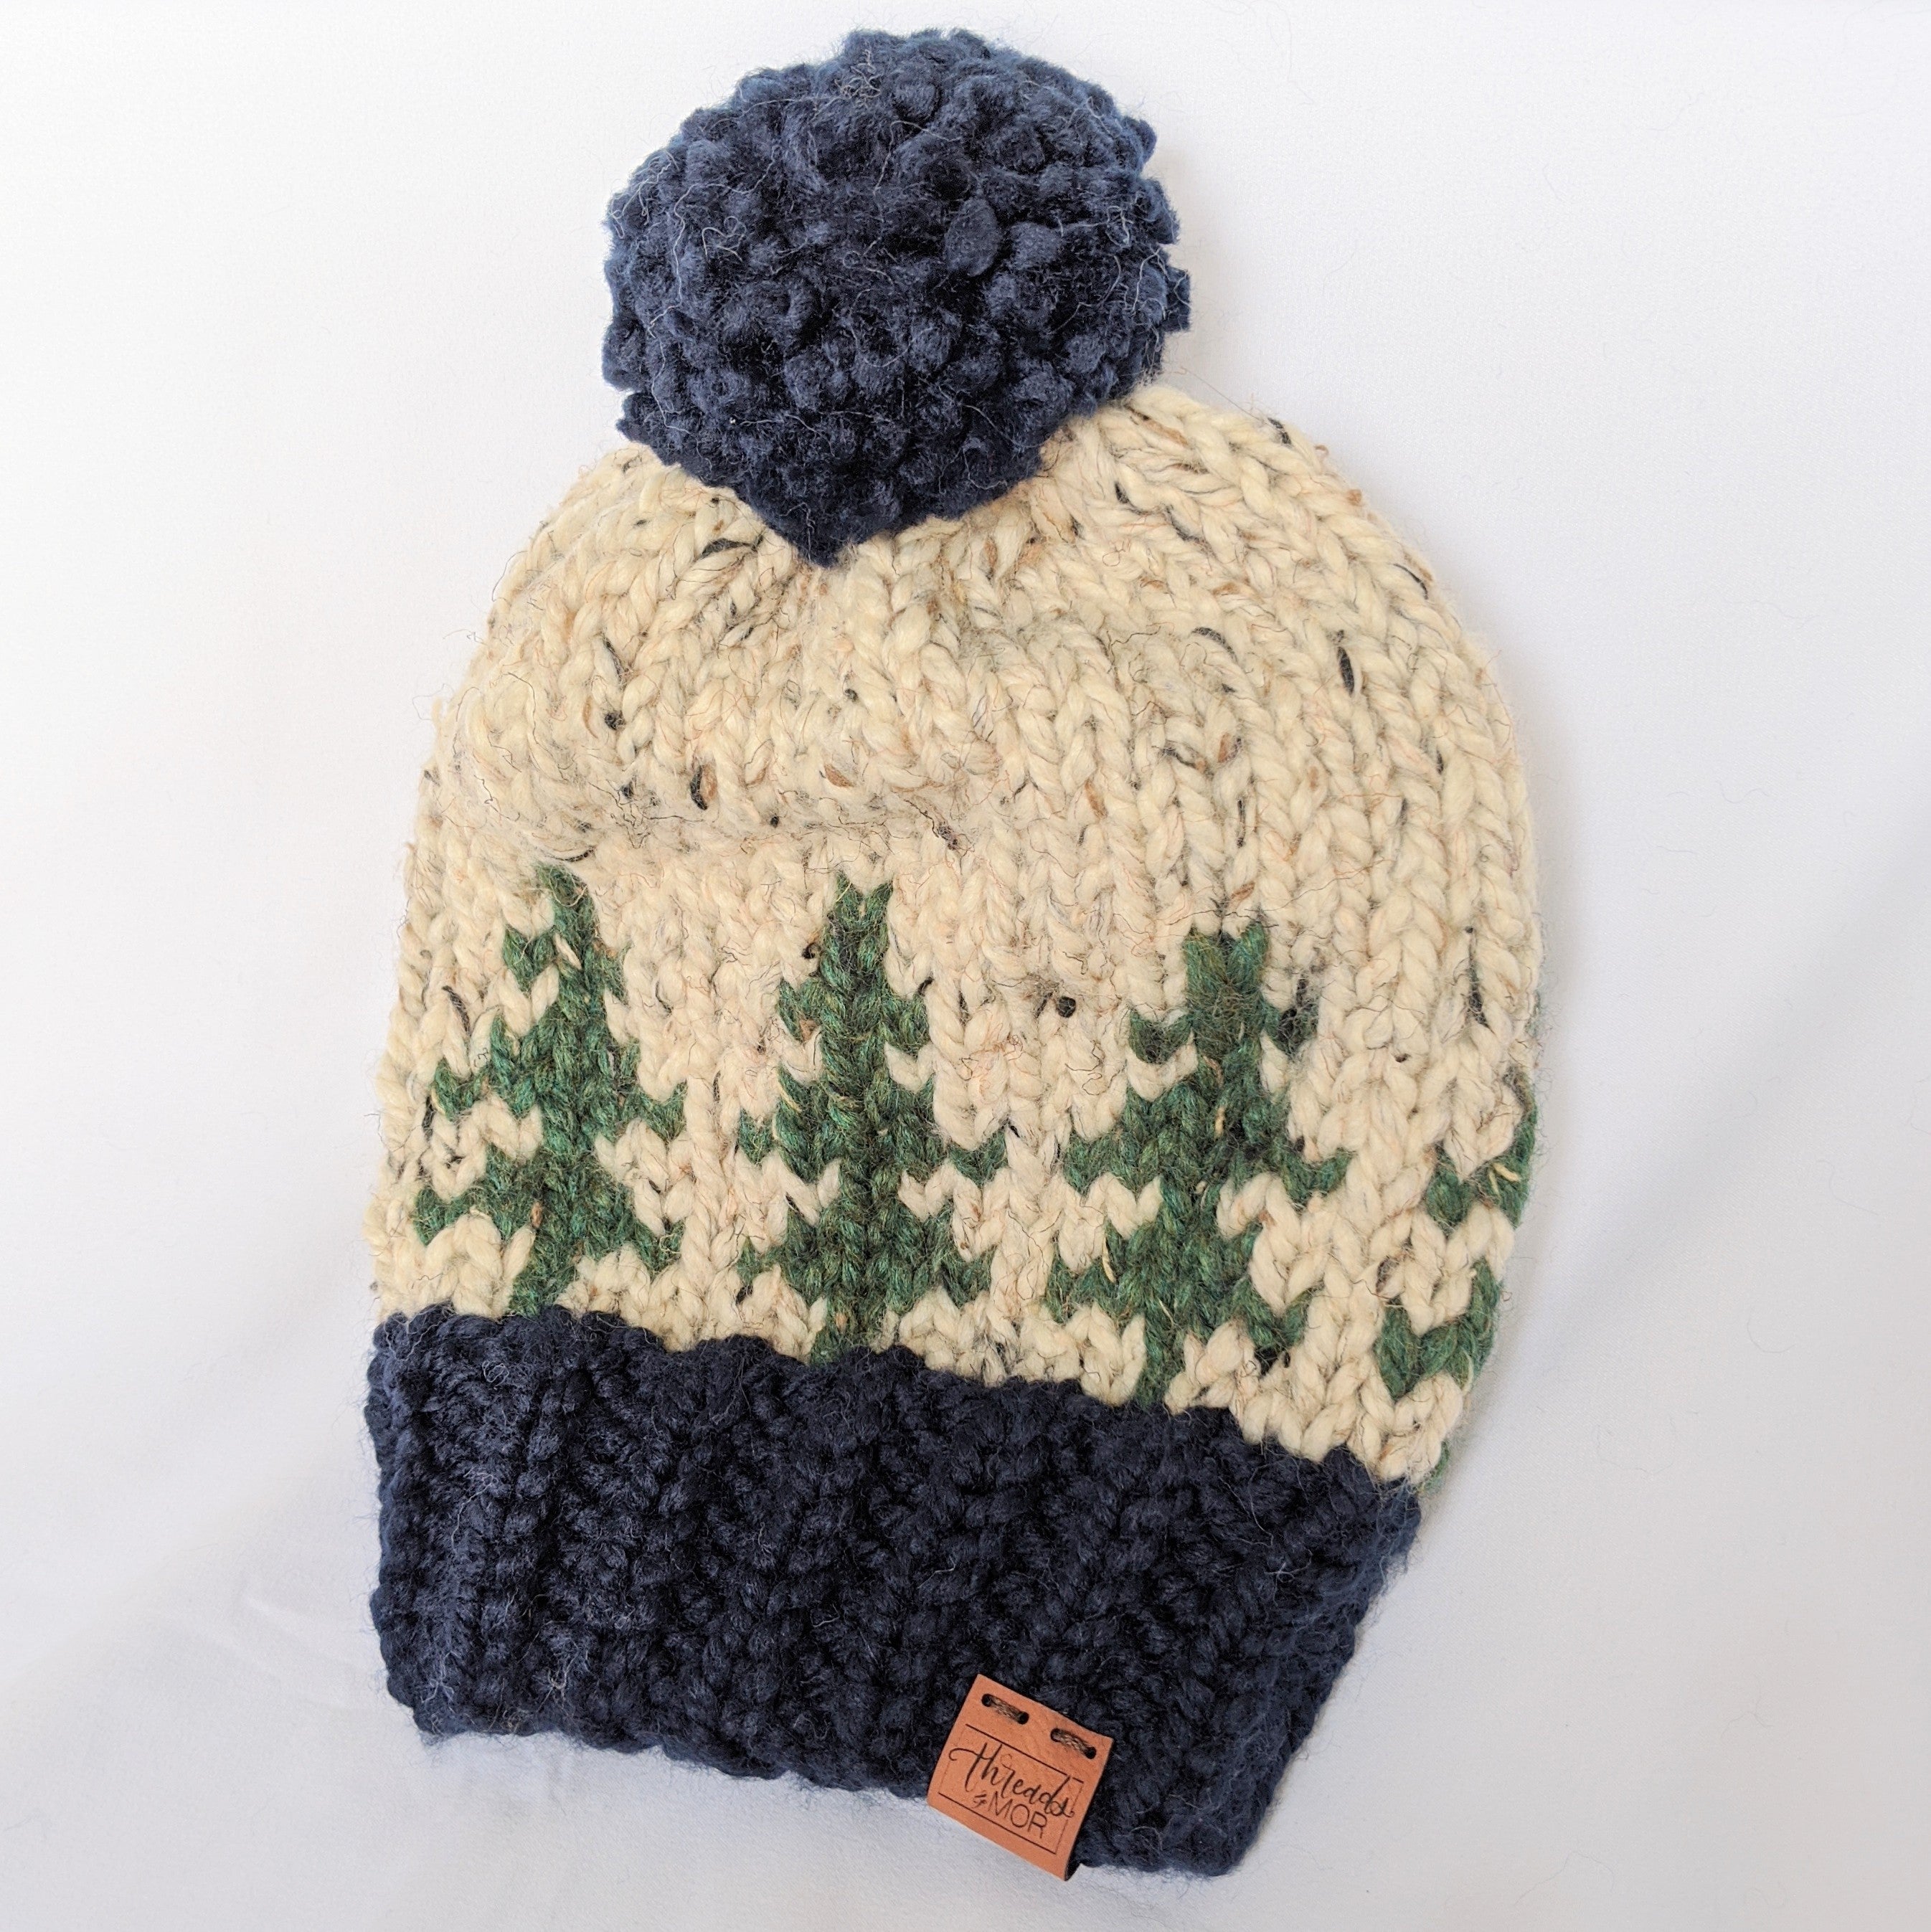 Evergreen slouchy knit hat with yarn pompom